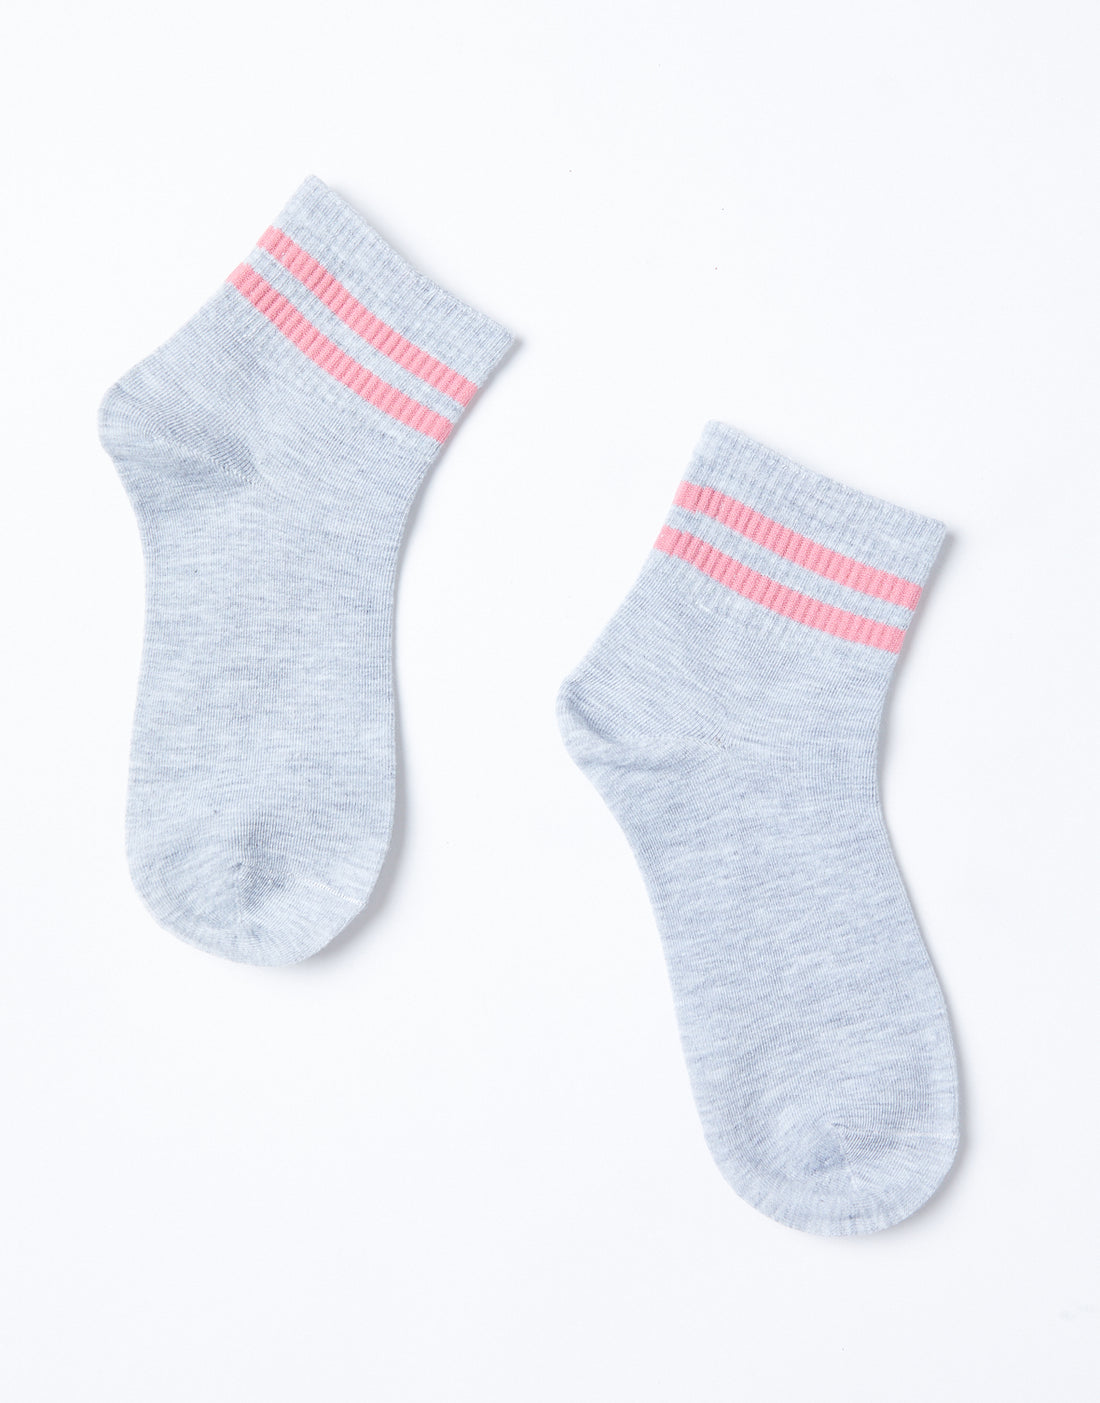 Striped Ankle Socks Accessories Gray One Size -2020AVE